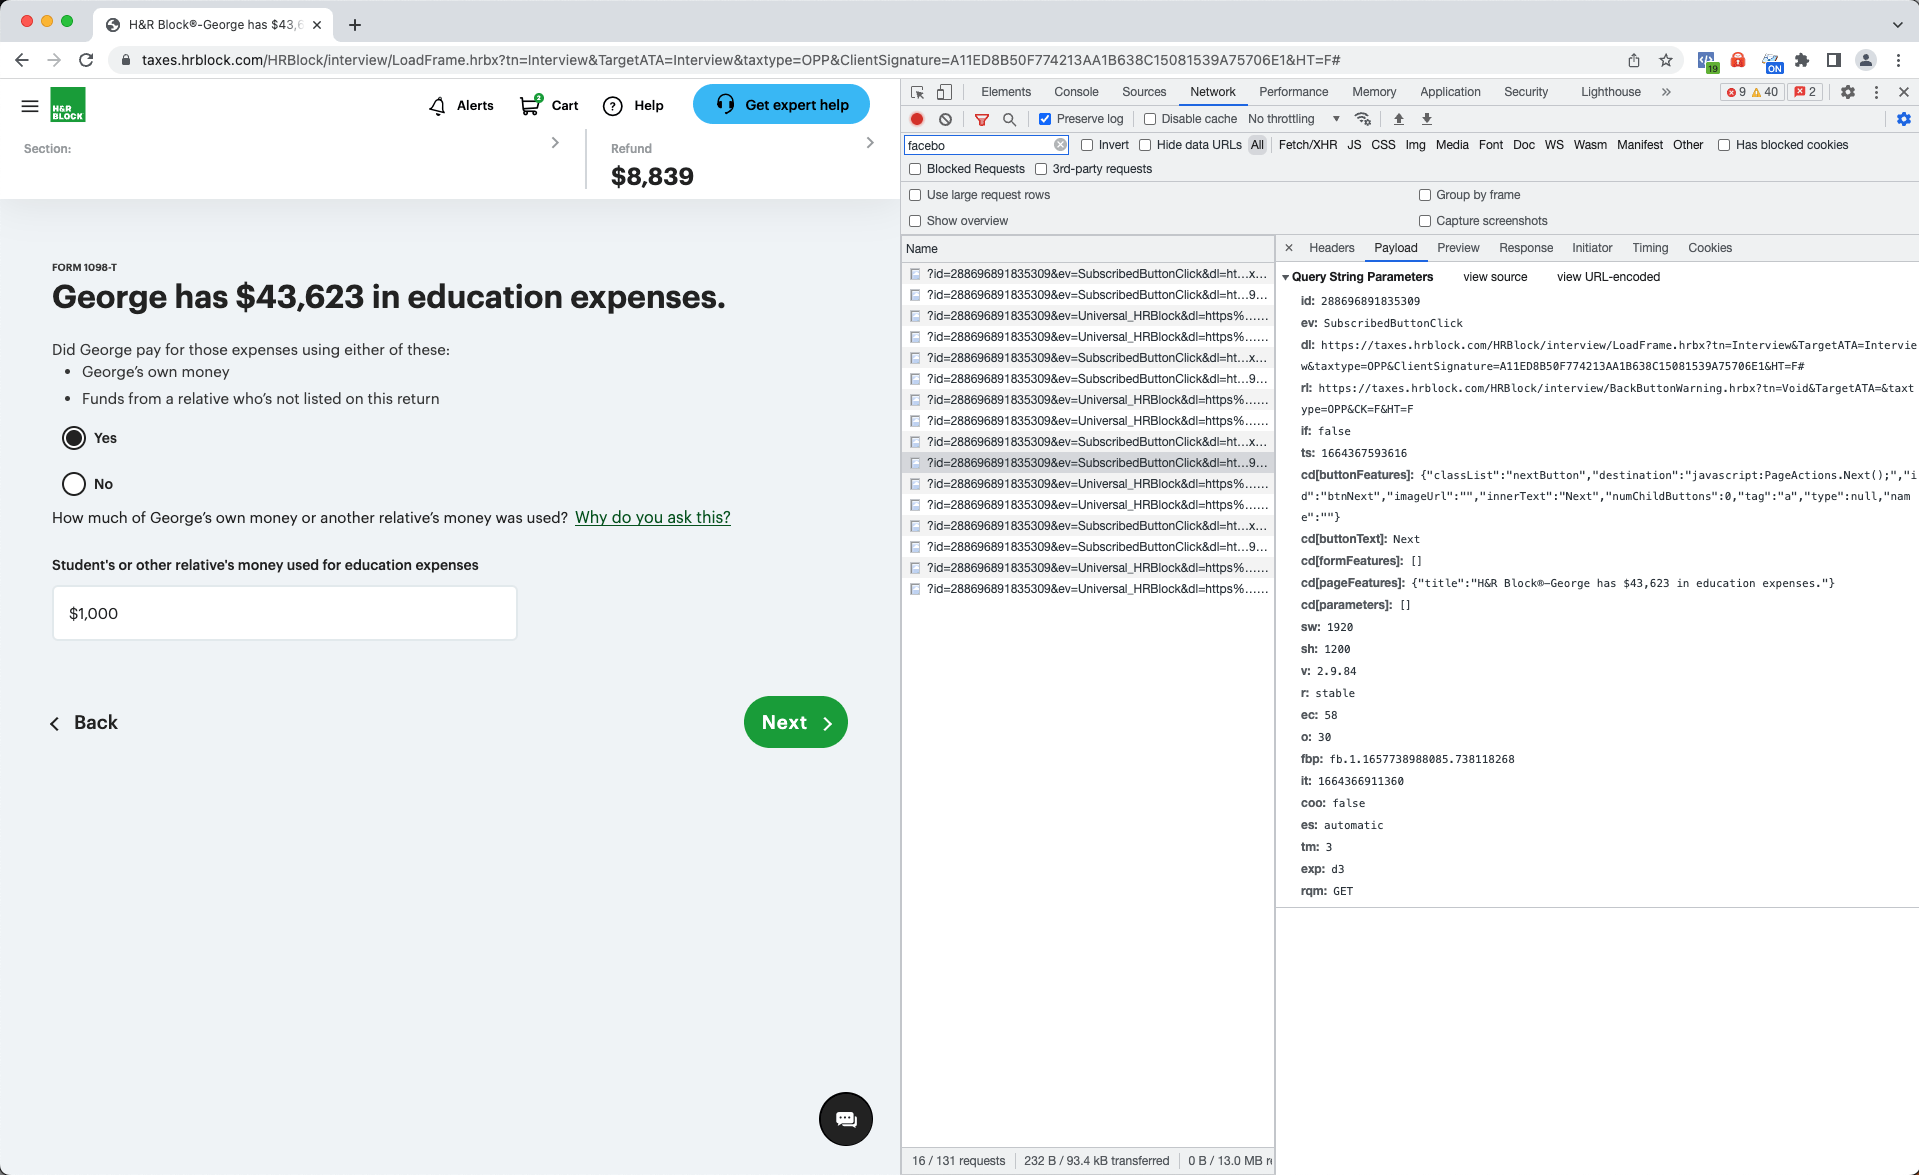 A screenshot provided by The Markup on their Github account showing the data chain being sent to Meta via Meta Pixel (Screenshot: The Markup)